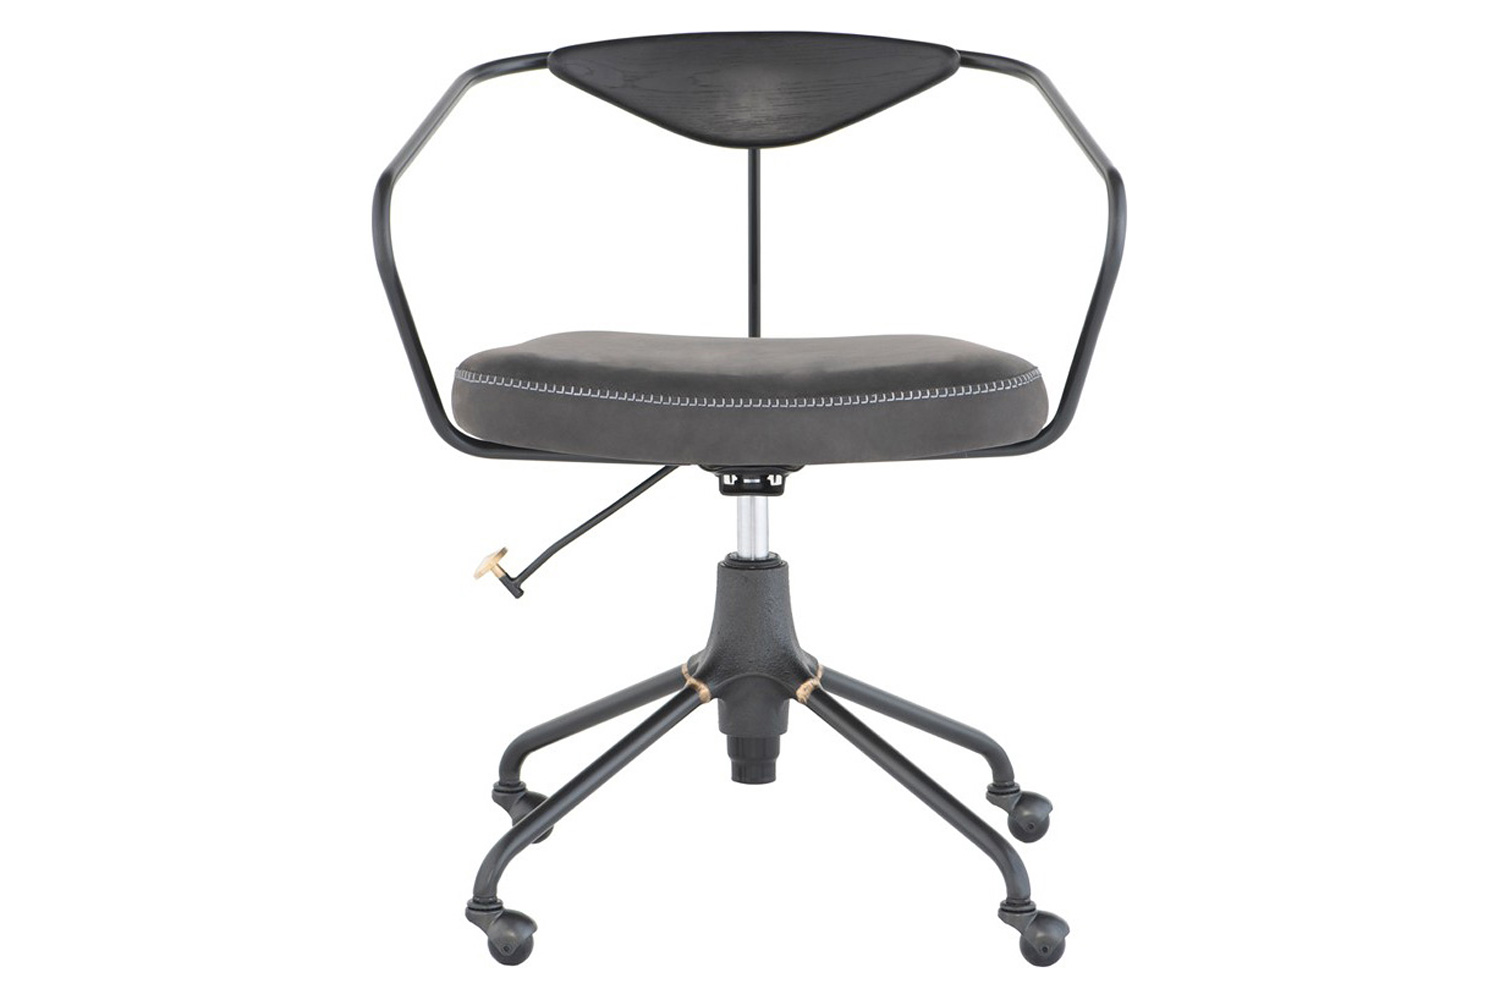 Nuevo™ Akron Office Chair - Storm Black Leather Seat
